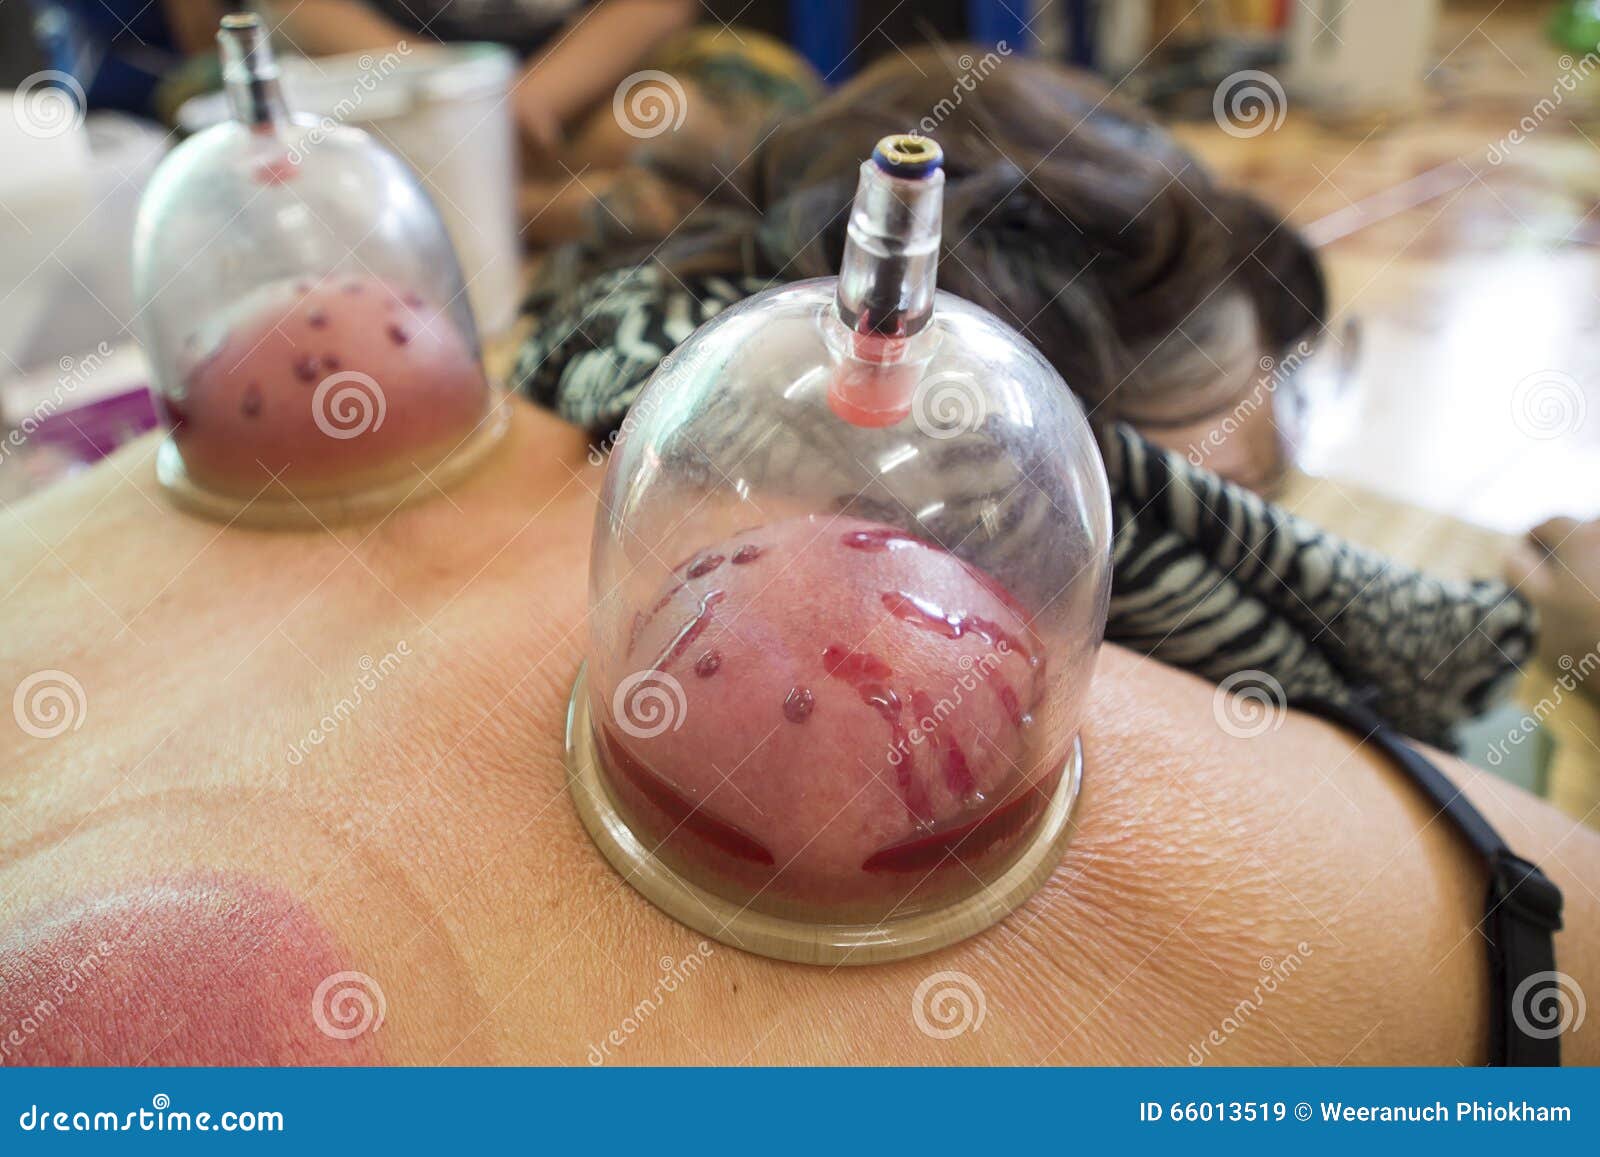 Cupping,traditional Chinese Medicine Stock Image - Image ...